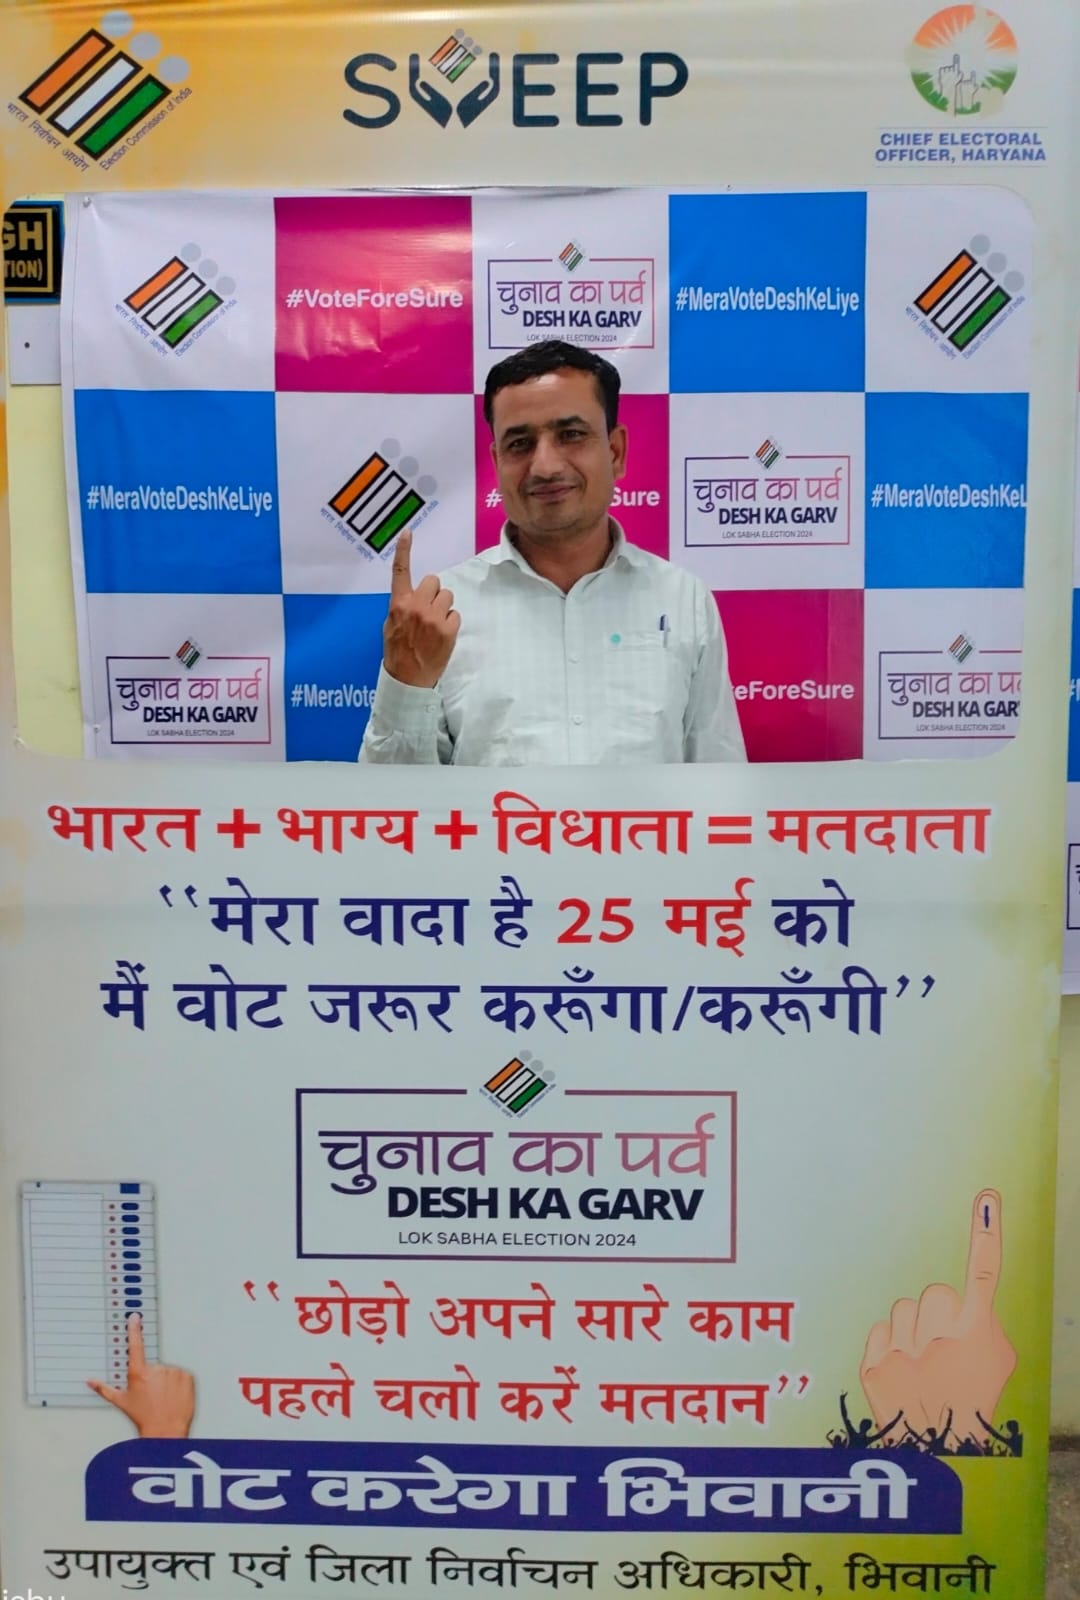 voter-awareness-campaign-bhiwani-selfie-point-center-of-attraction